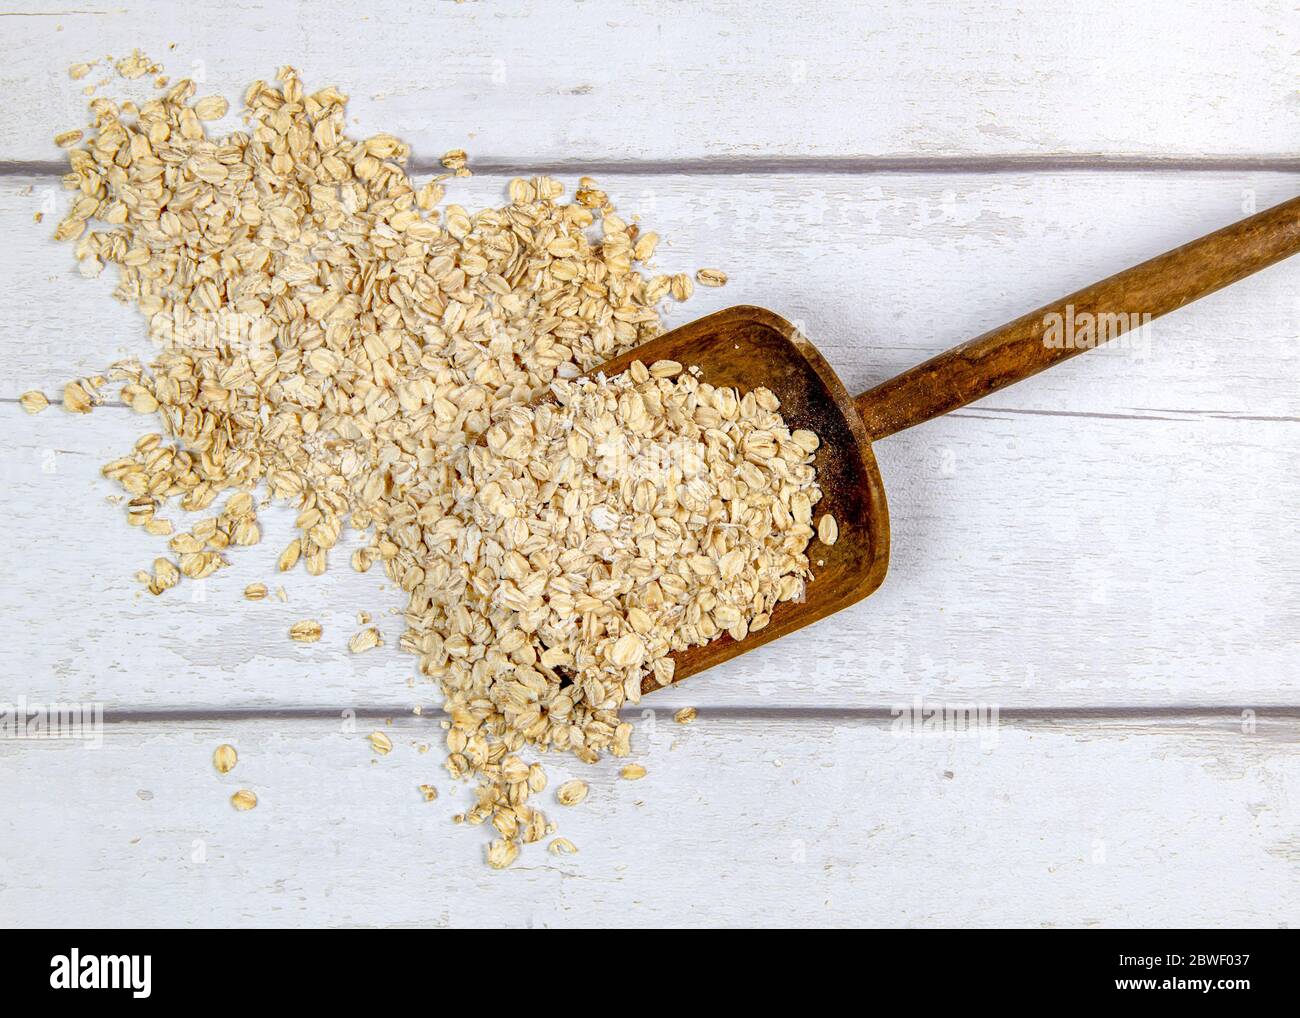 Top view of rustic spade taking portion of raw oatmeal from heap on white lumber table  shoot for text overlay and recipes Stock Photo